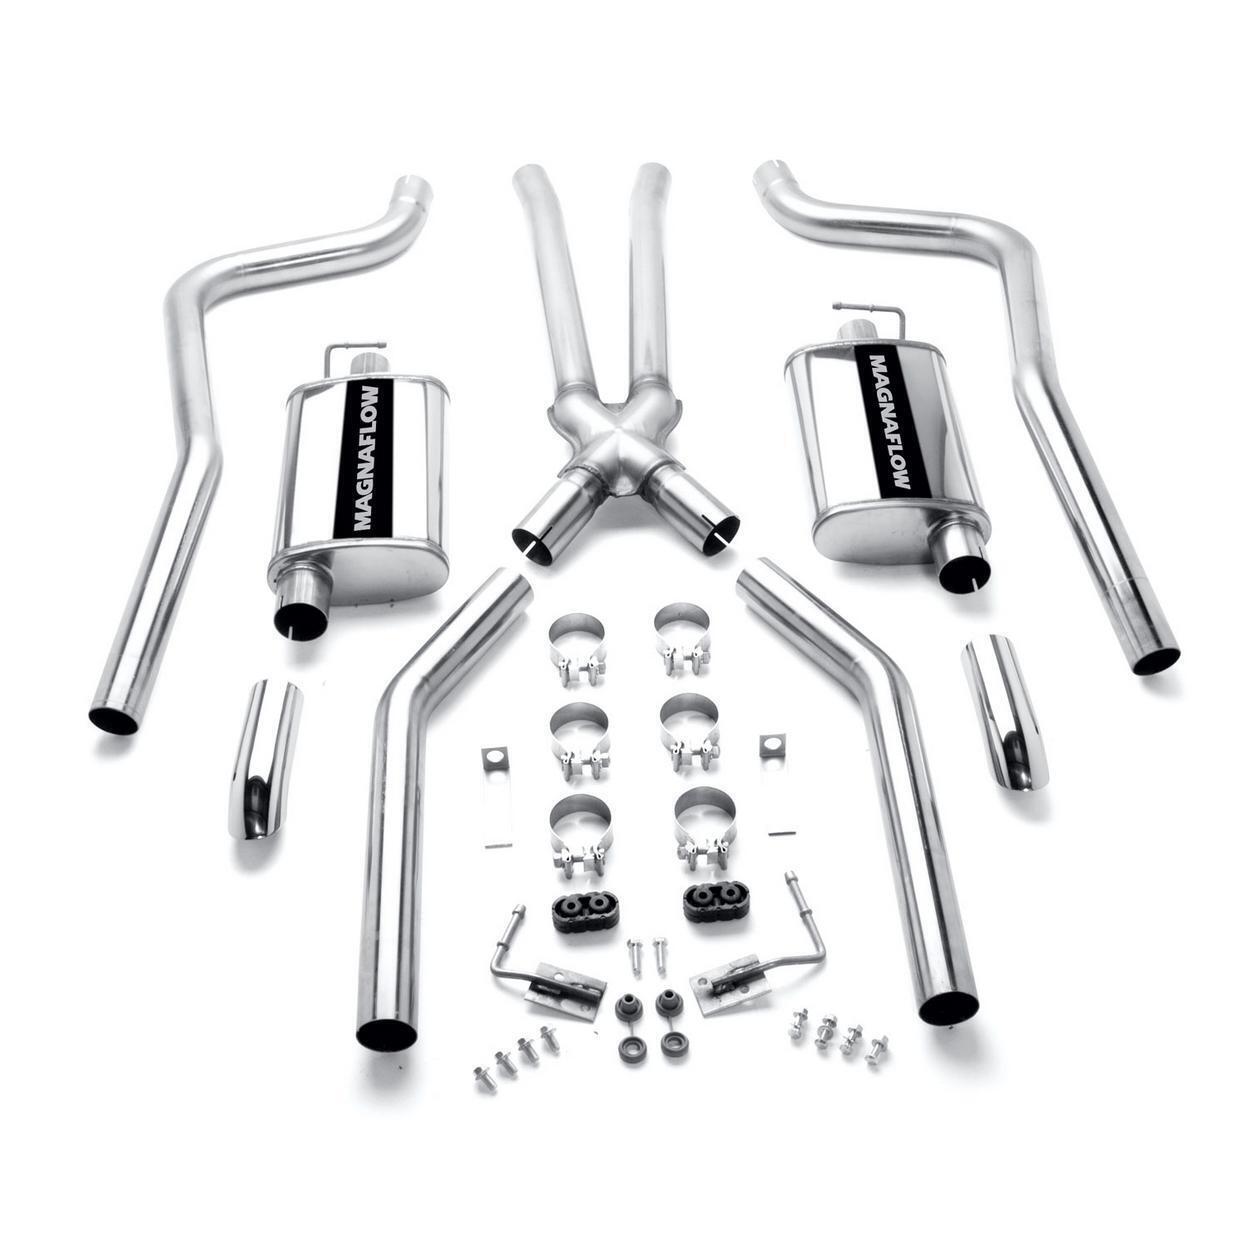 Magnaflow Exhaust System Kit for 1970 Plymouth Barracuda 6.3L V8 GAS OHV